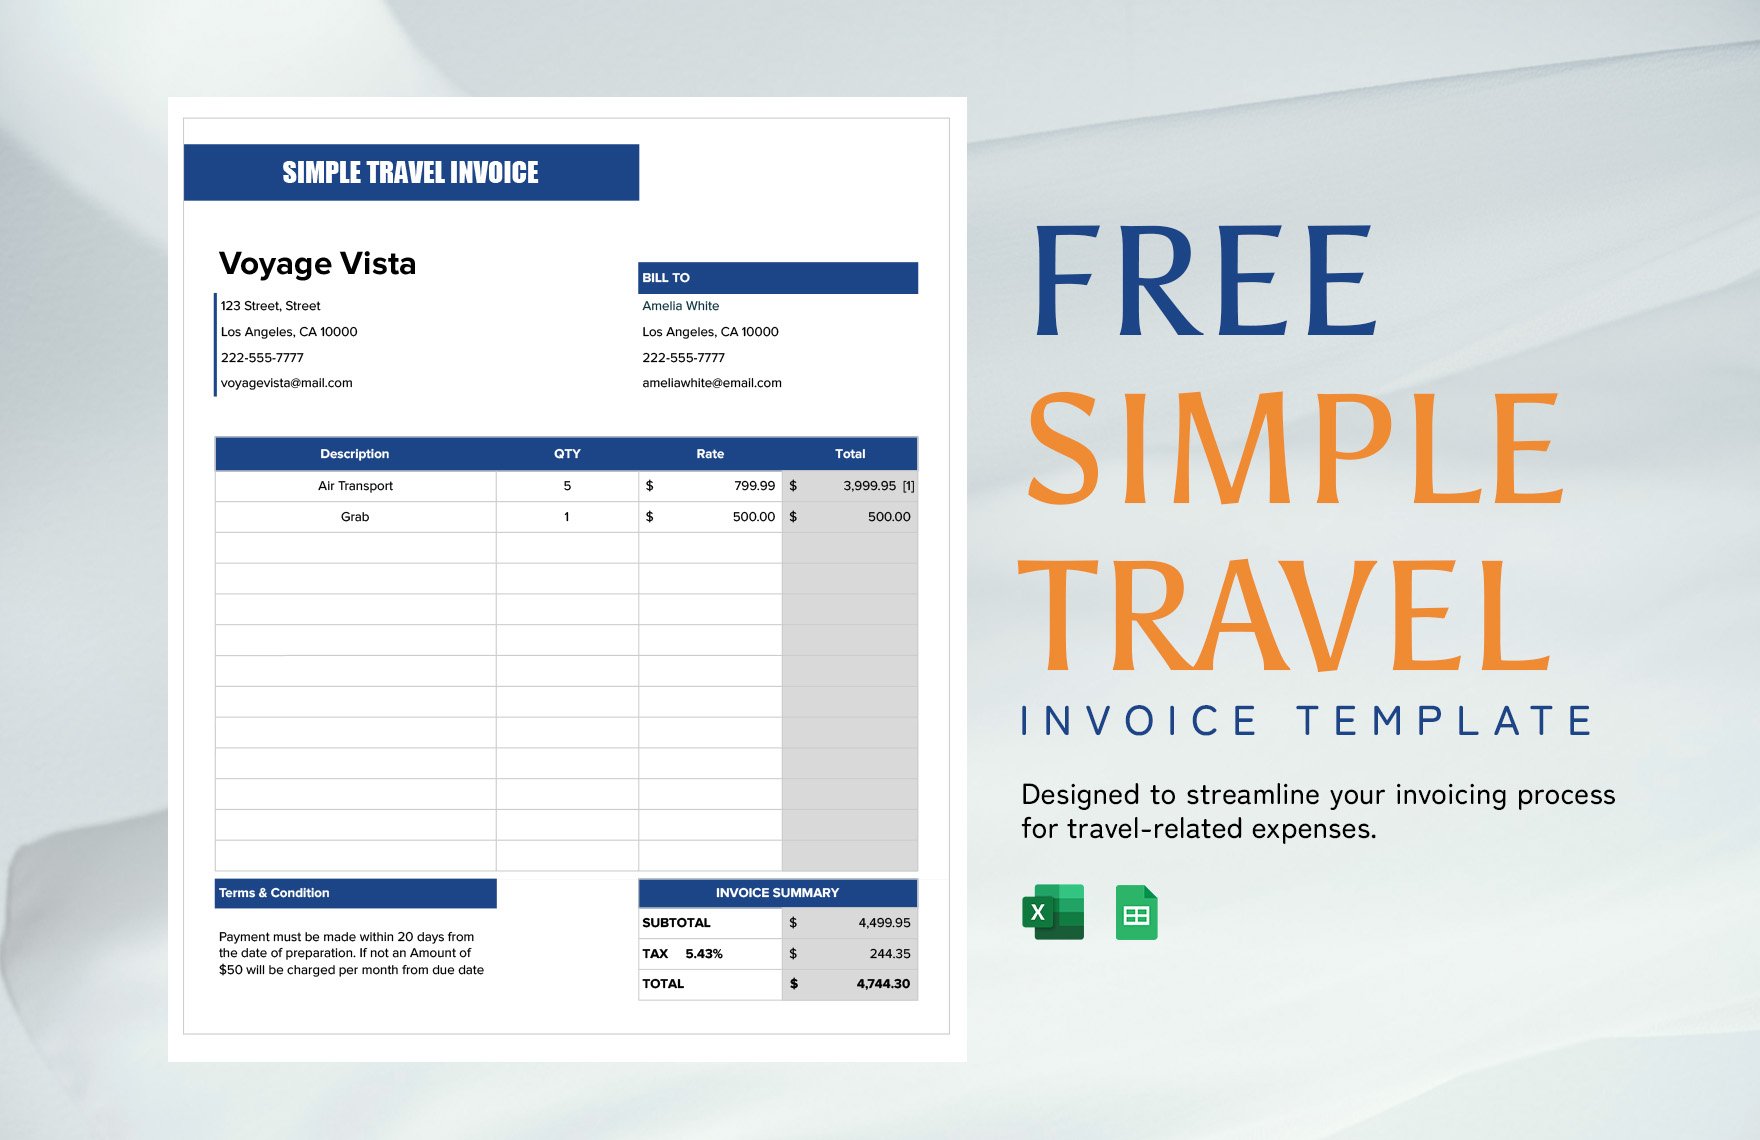 Simple Travel Invoice Template